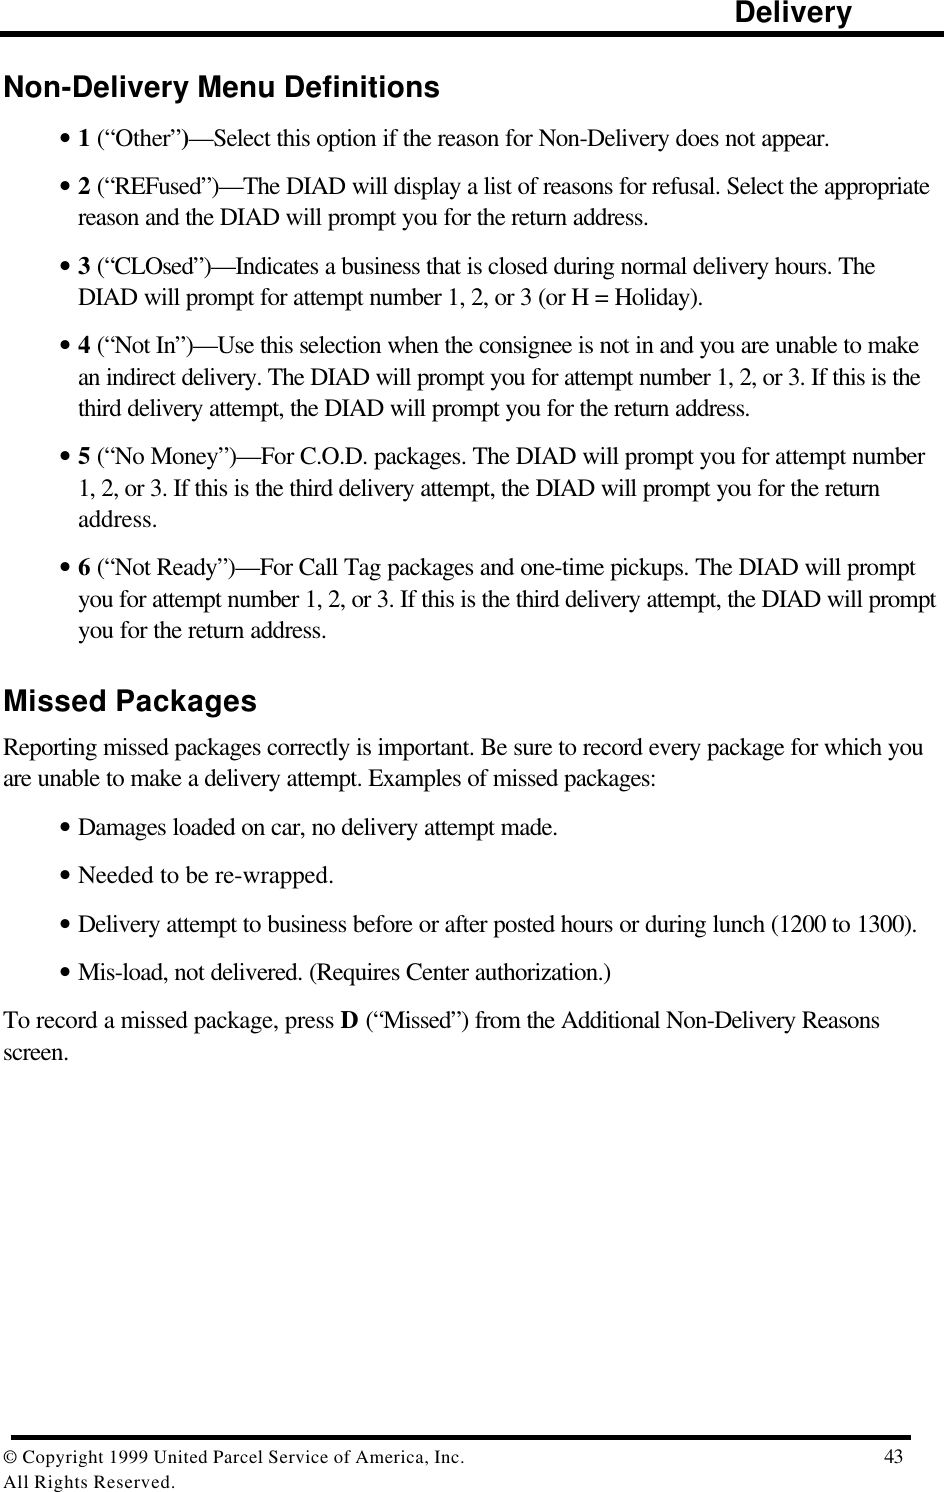                                                                                                                      Delivery© Copyright 1999 United Parcel Service of America, Inc.  43All Rights Reserved.Non-Delivery Menu Definitions• 1 (“Other”)—Select this option if the reason for Non-Delivery does not appear.• 2 (“REFused”)—The DIAD will display a list of reasons for refusal. Select the appropriatereason and the DIAD will prompt you for the return address.• 3 (“CLOsed”)—Indicates a business that is closed during normal delivery hours. TheDIAD will prompt for attempt number 1, 2, or 3 (or H = Holiday).• 4 (“Not In”)—Use this selection when the consignee is not in and you are unable to makean indirect delivery. The DIAD will prompt you for attempt number 1, 2, or 3. If this is thethird delivery attempt, the DIAD will prompt you for the return address.• 5 (“No Money”)—For C.O.D. packages. The DIAD will prompt you for attempt number1, 2, or 3. If this is the third delivery attempt, the DIAD will prompt you for the returnaddress.• 6 (“Not Ready”)—For Call Tag packages and one-time pickups. The DIAD will promptyou for attempt number 1, 2, or 3. If this is the third delivery attempt, the DIAD will promptyou for the return address.Missed PackagesReporting missed packages correctly is important. Be sure to record every package for which youare unable to make a delivery attempt. Examples of missed packages:• Damages loaded on car, no delivery attempt made.• Needed to be re-wrapped.• Delivery attempt to business before or after posted hours or during lunch (1200 to 1300).• Mis-load, not delivered. (Requires Center authorization.)To record a missed package, press D (“Missed”) from the Additional Non-Delivery Reasonsscreen.